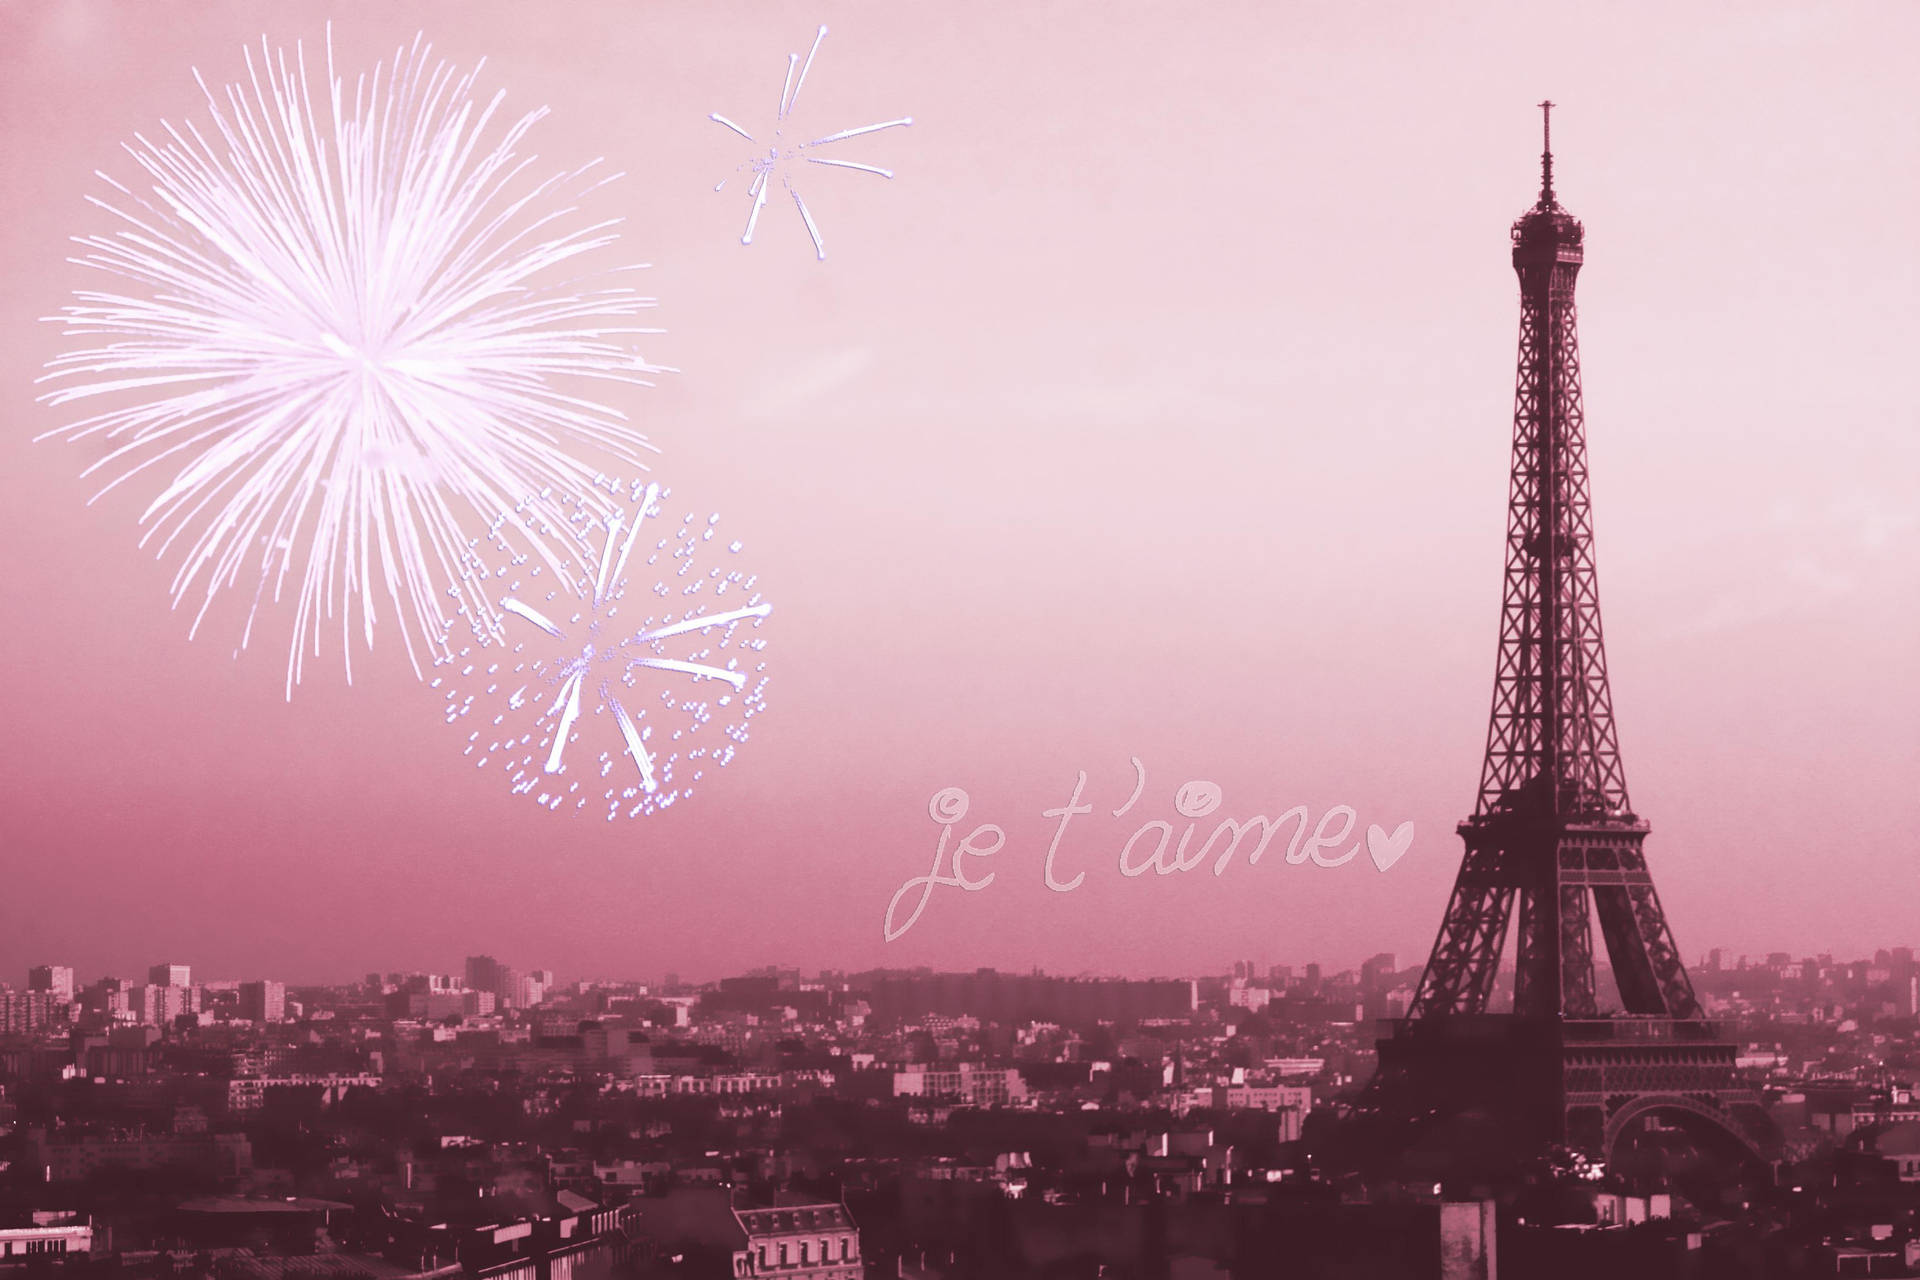 100+] Pink Eiffel Tower Wallpapers | Wallpapers.com